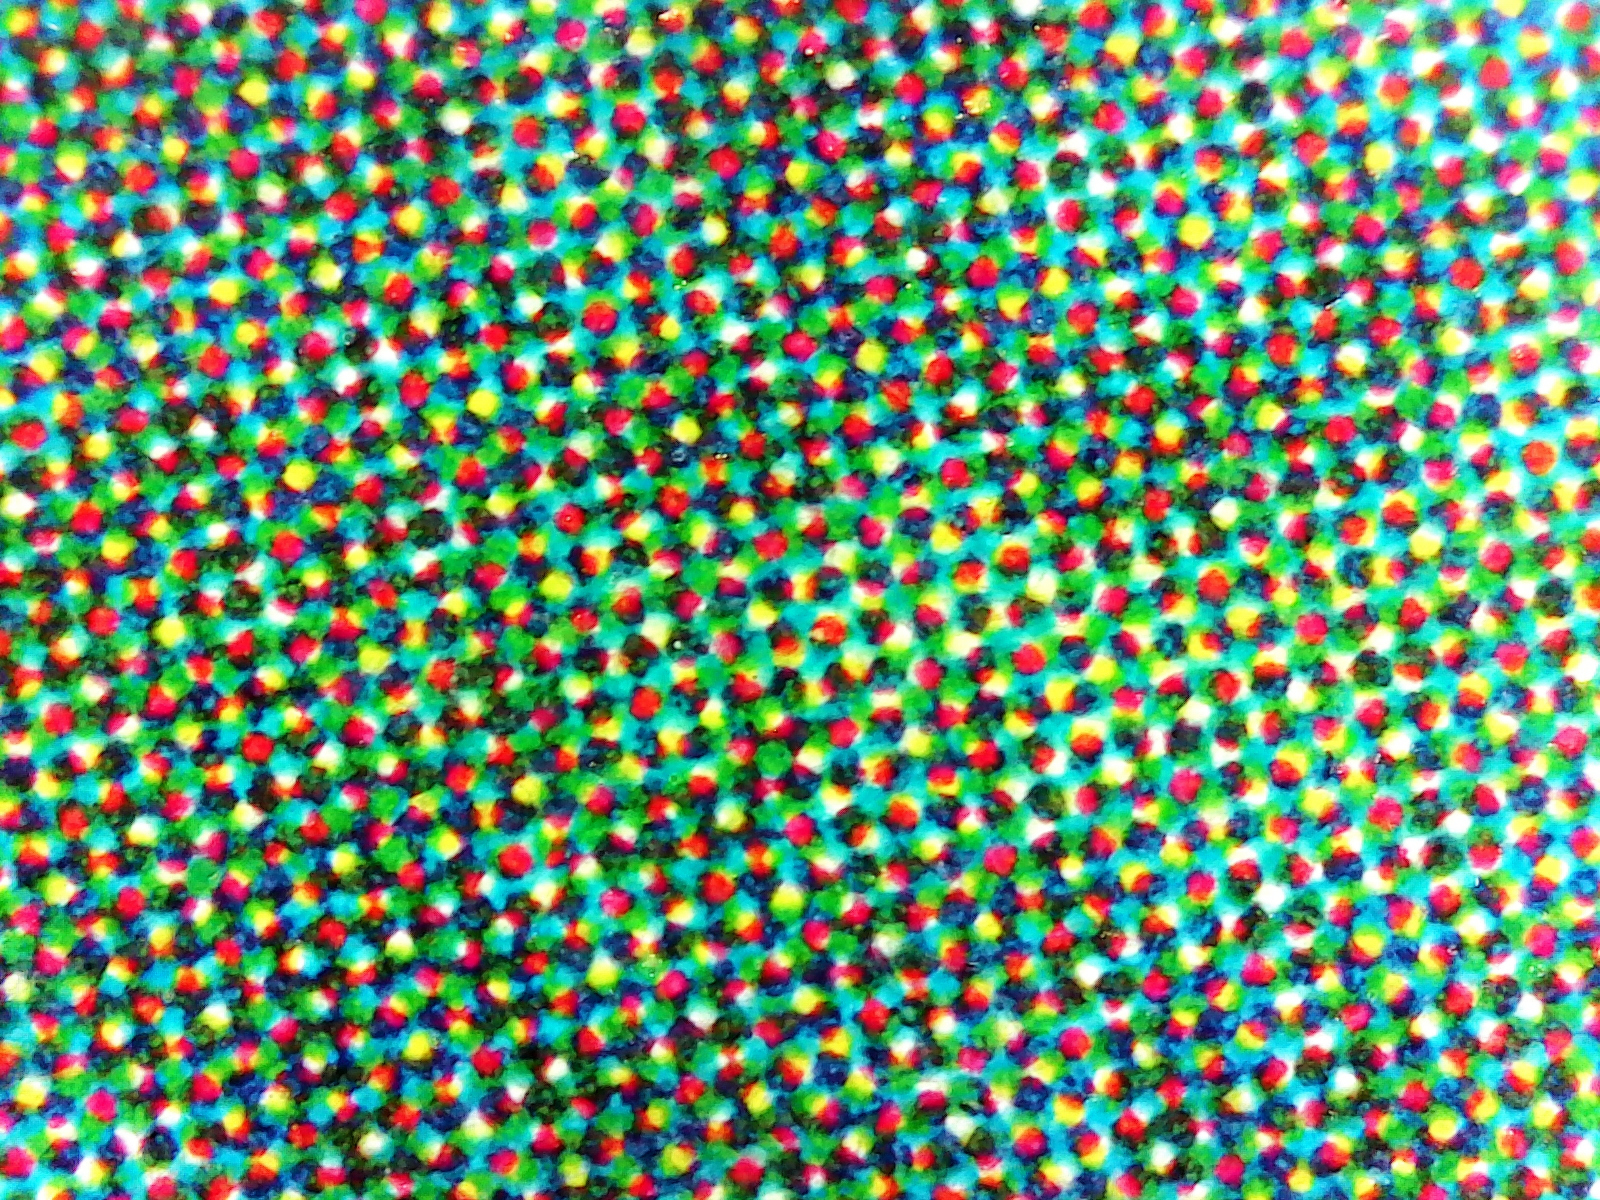 The same CMYK print as above, but with a zoomed out view